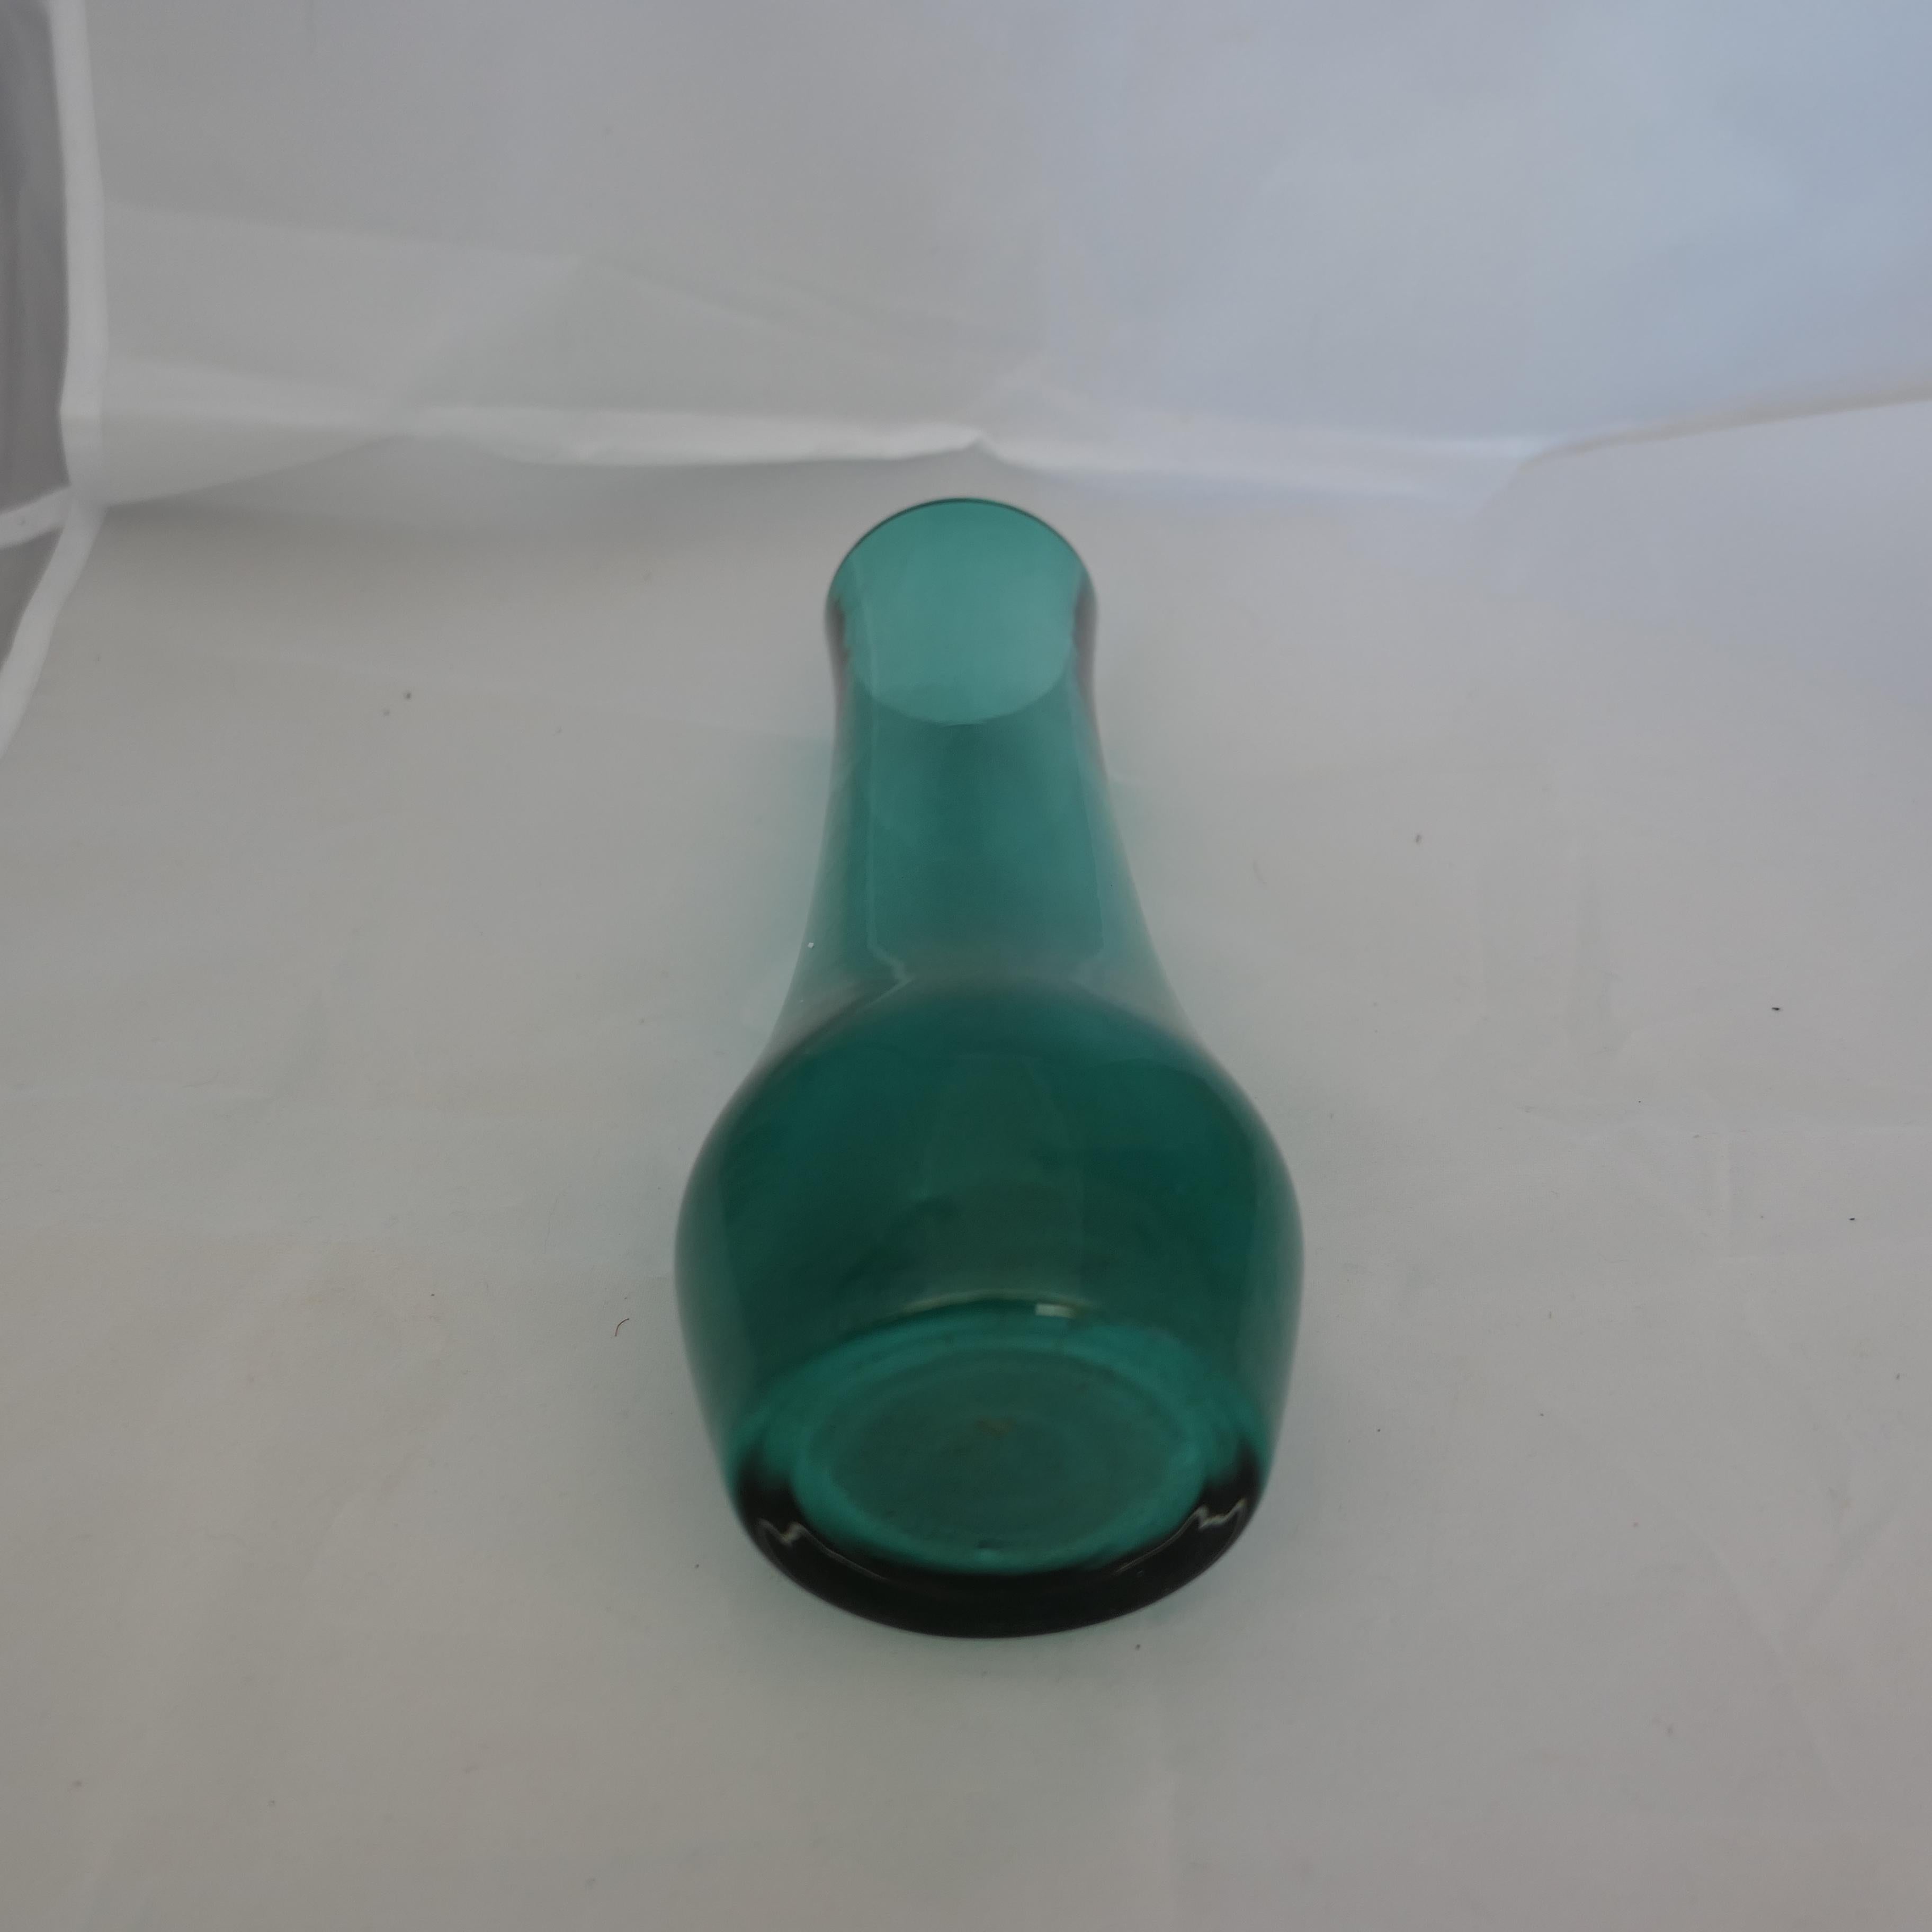 Art Glass 1960s Green Glass Vase by Tamara Aladin for Riihimäen Lasi Oy      For Sale